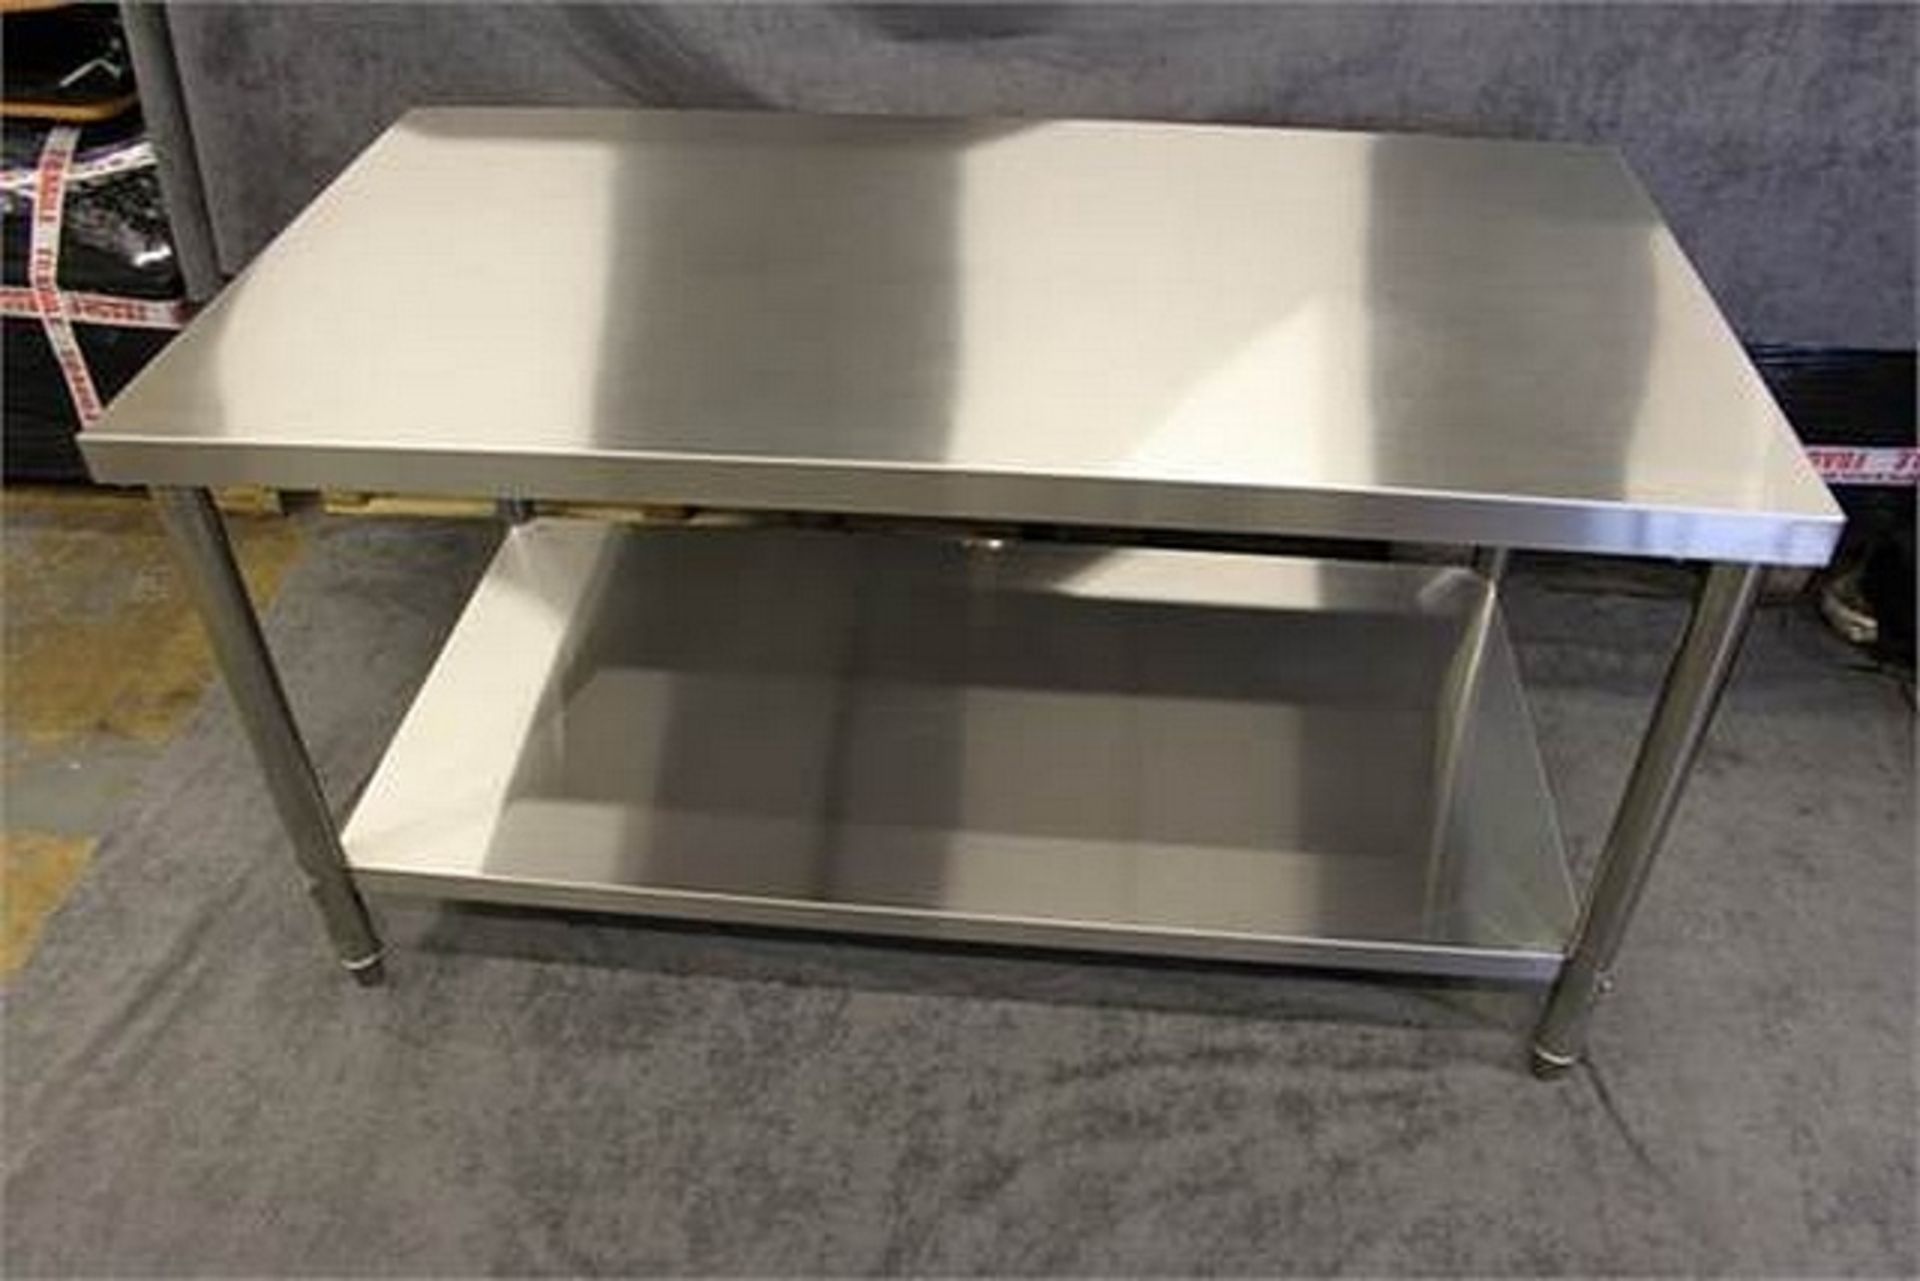 Brand New stainless steel heavy duty preparation table 1800 x 800 x 800 50mm thick top grade 304 all